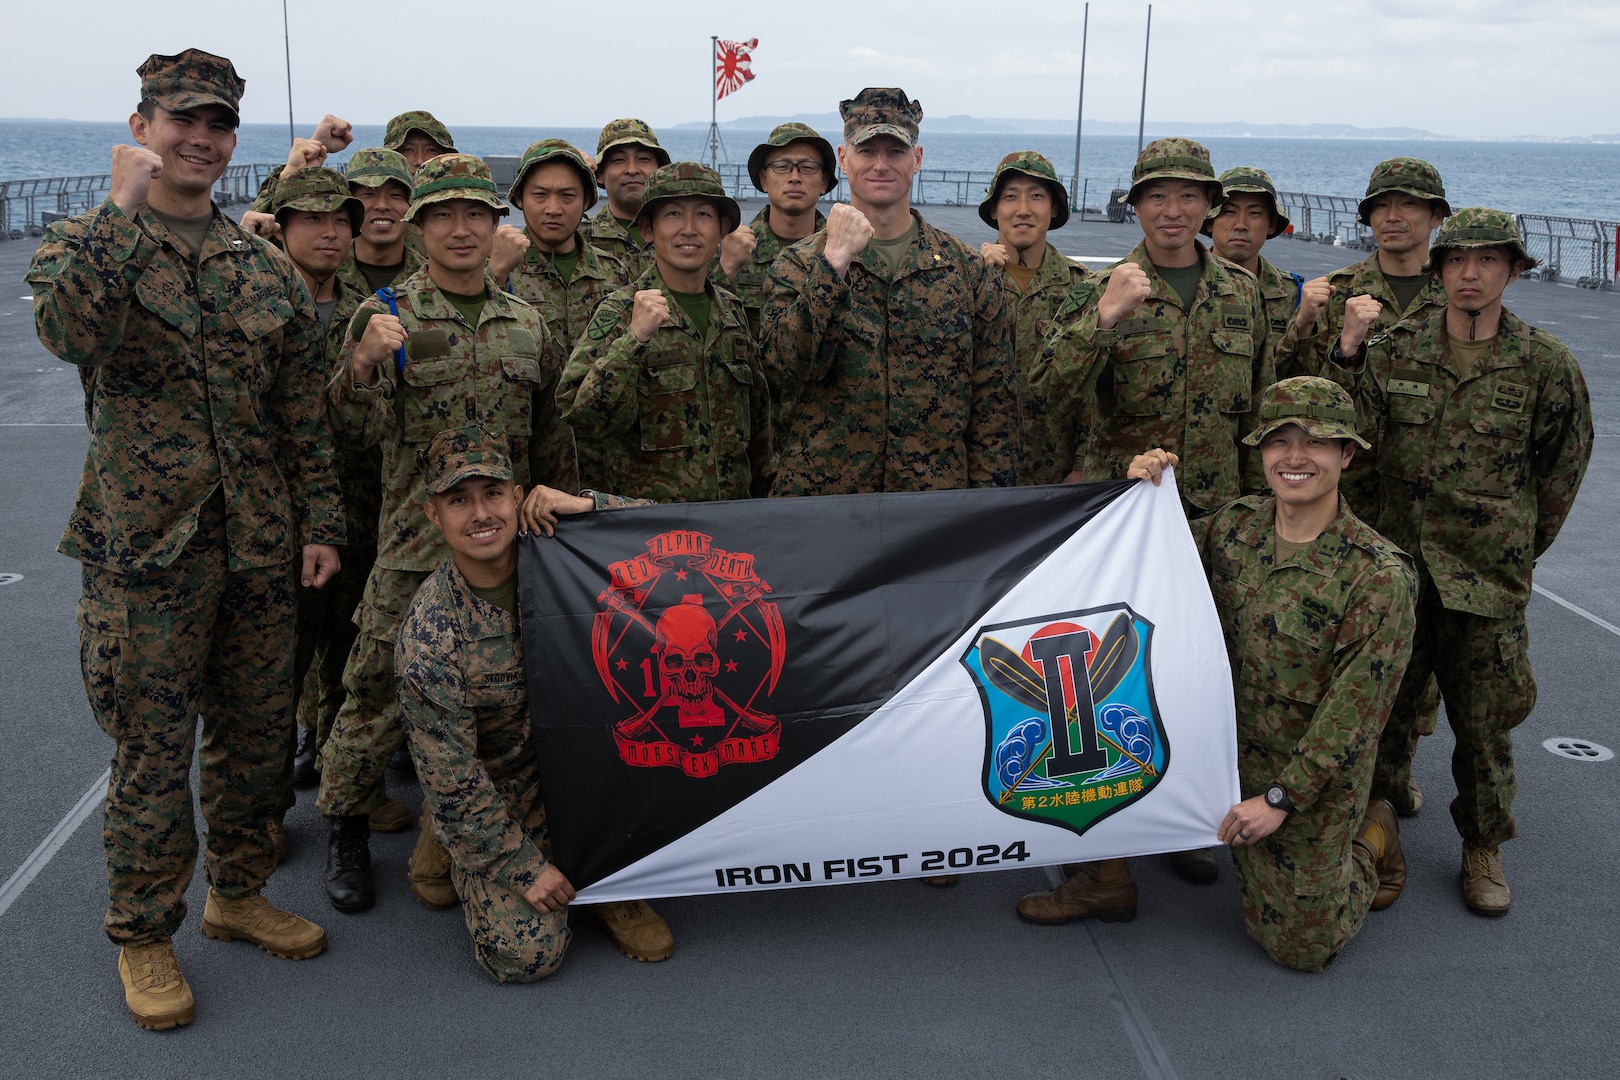 U.S. Marines with Battalion Landing Team 1/1, 31st Marine Expeditionary Unit and Japanese soldiers with the 2nd Amphibious Rapid Deployment Regiment pose for a picture following the closing ceremony of Iron Fist 24 aboard the Osumi-class tank landing ship JS Kunisaki (LST-4003) in Okinawa, Japan, Mar. 17, 2024. The closing ceremony concluded training between the armed forces and awarded servicemembers for outstanding performance during Iron Fist 24. Iron Fist is an annual bilateral exercise designed to increase interoperability and strengthen the relationships between the U.S. Marine Corps, the U.S. Navy, the Japanese Ground Self-Defense Force, and the Japanese Maritime Self-Defense Force. (U.S. Marine Corps photo by Cpl. Juan K. Maldonado)